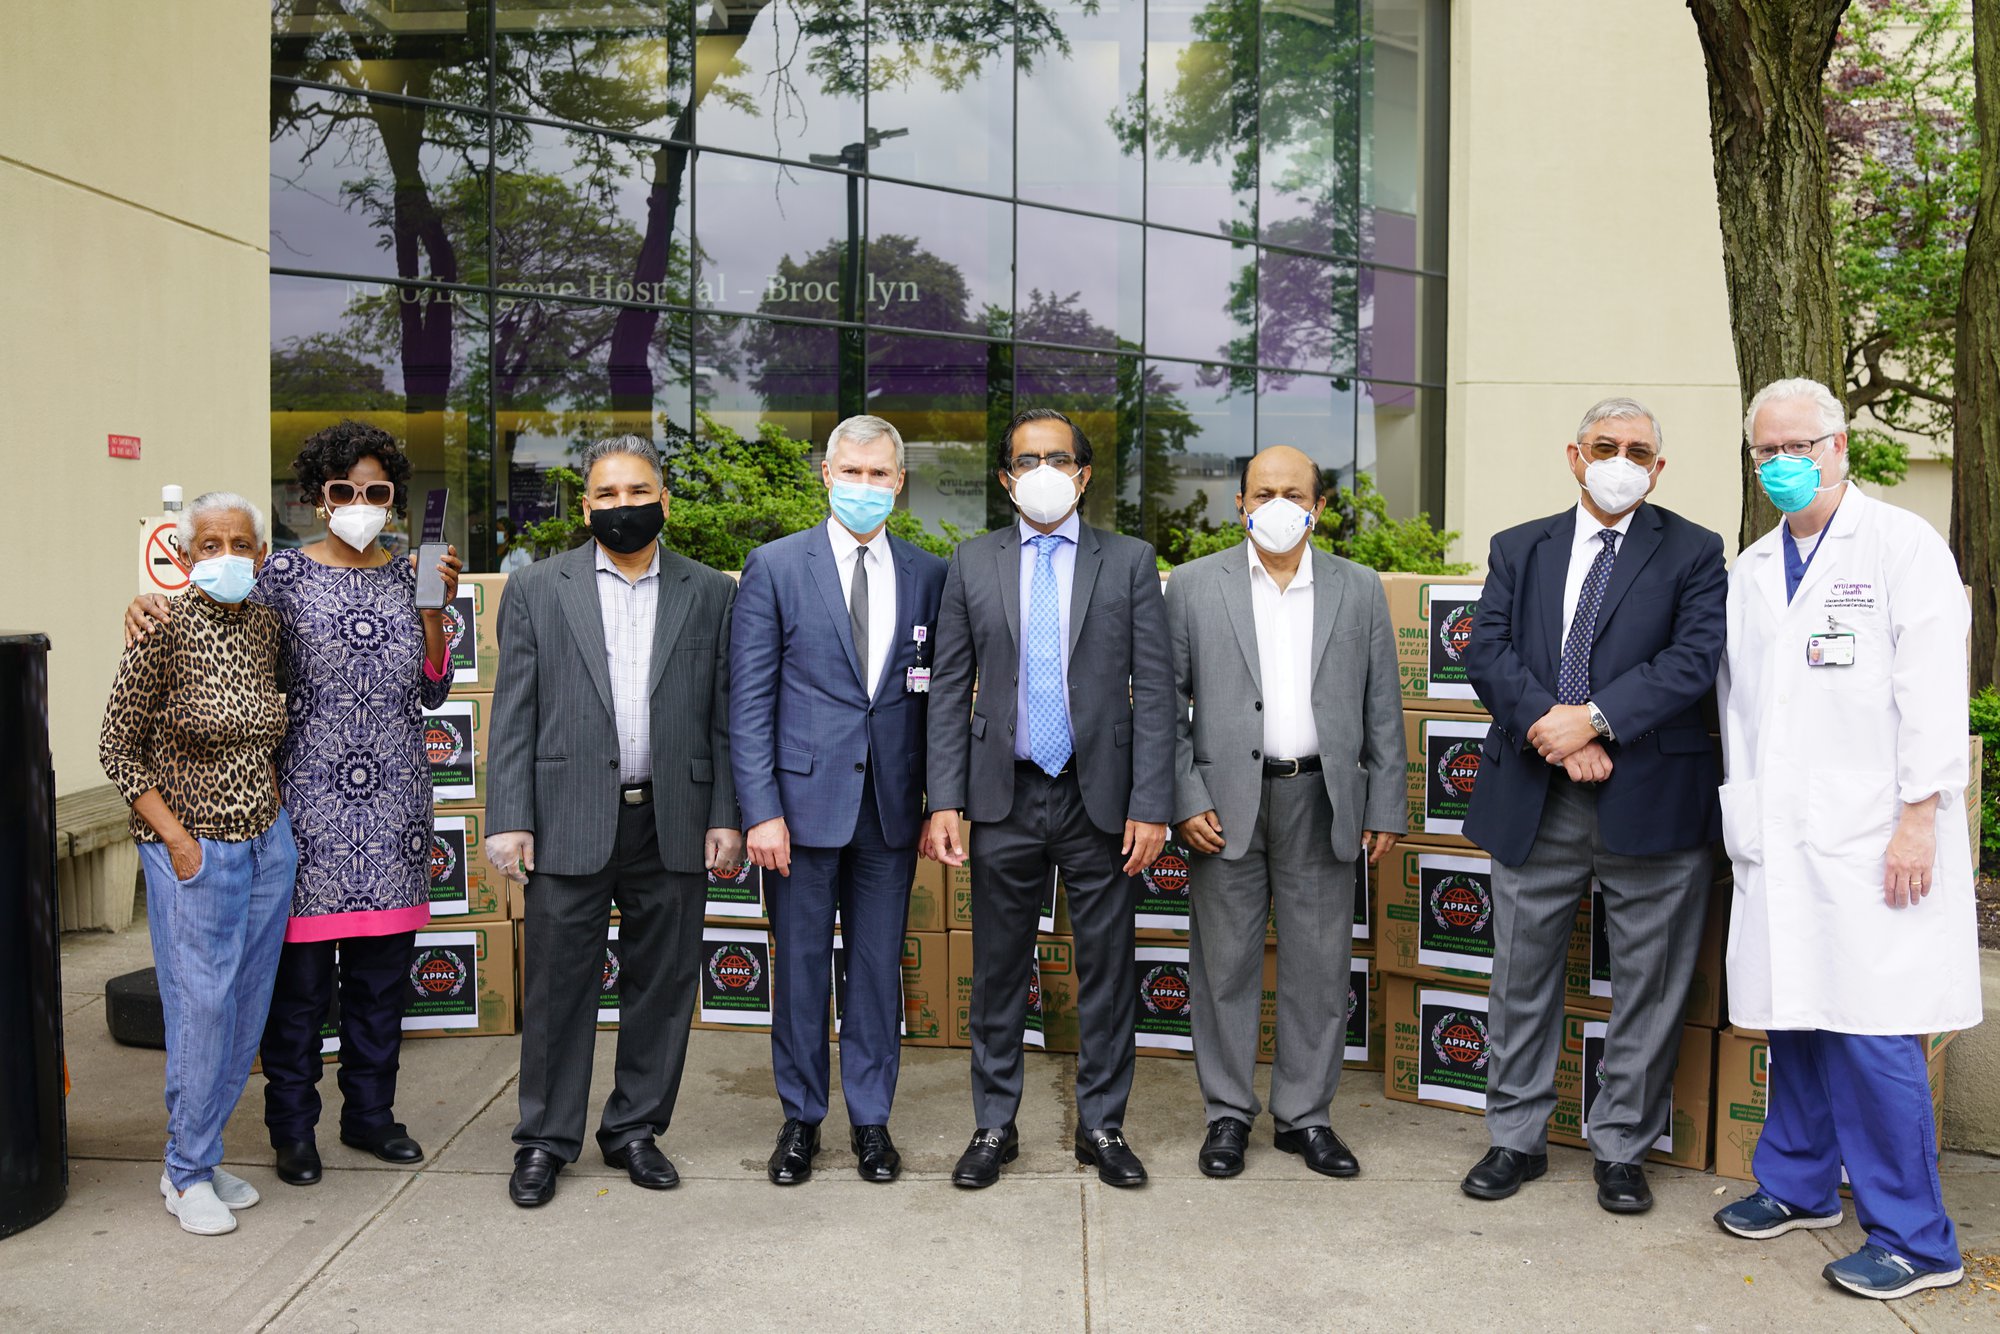 NYU Langone gets 5,000 masks as hospitals welcome back patients with unaddressed health concerns